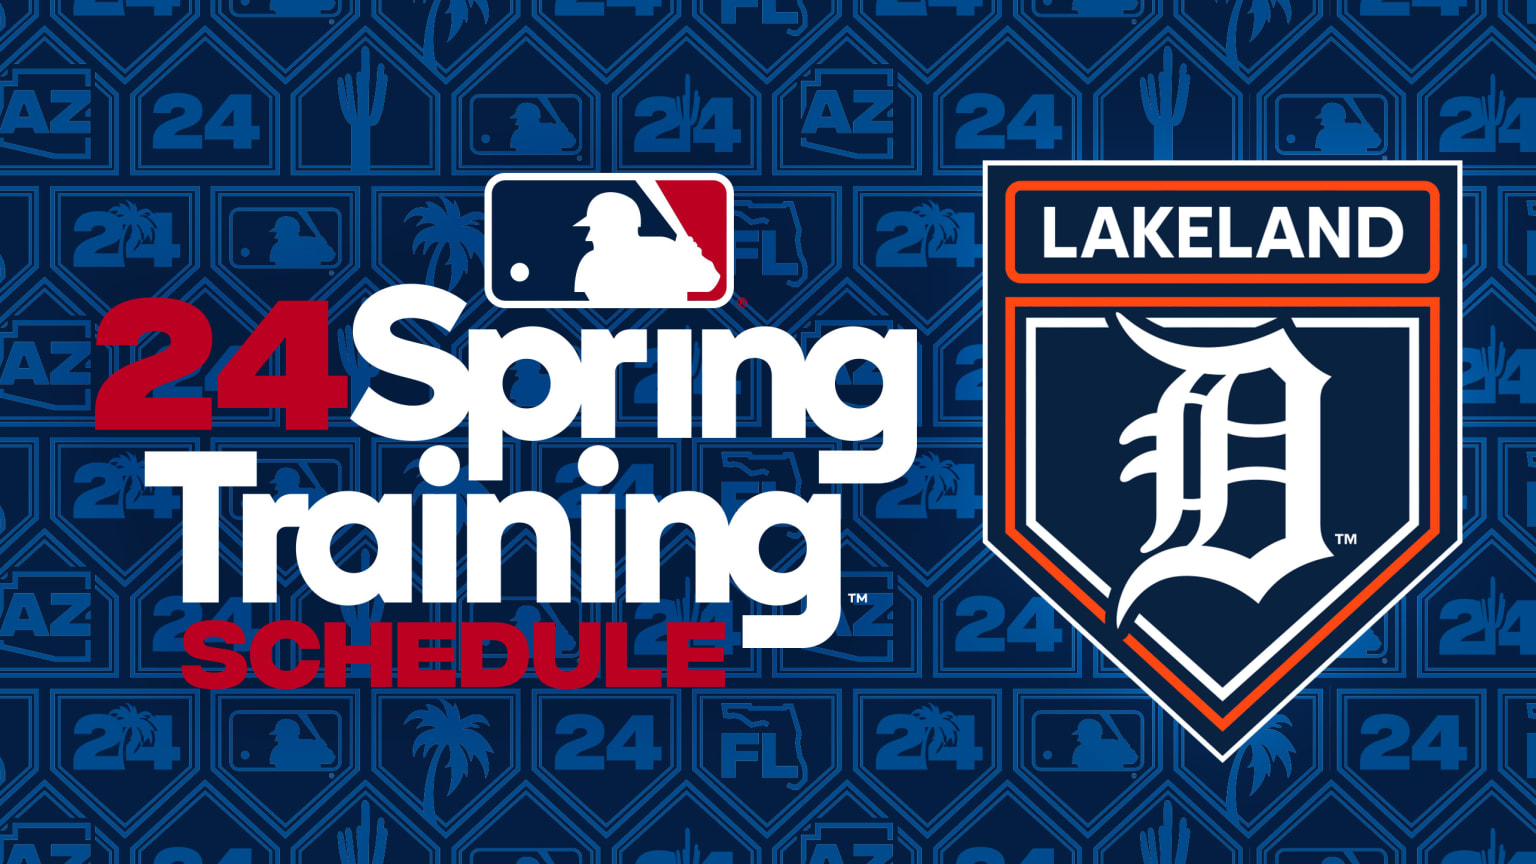 Detroit Tigers Spring Training News, Updates, Roster - Motor City Bengals